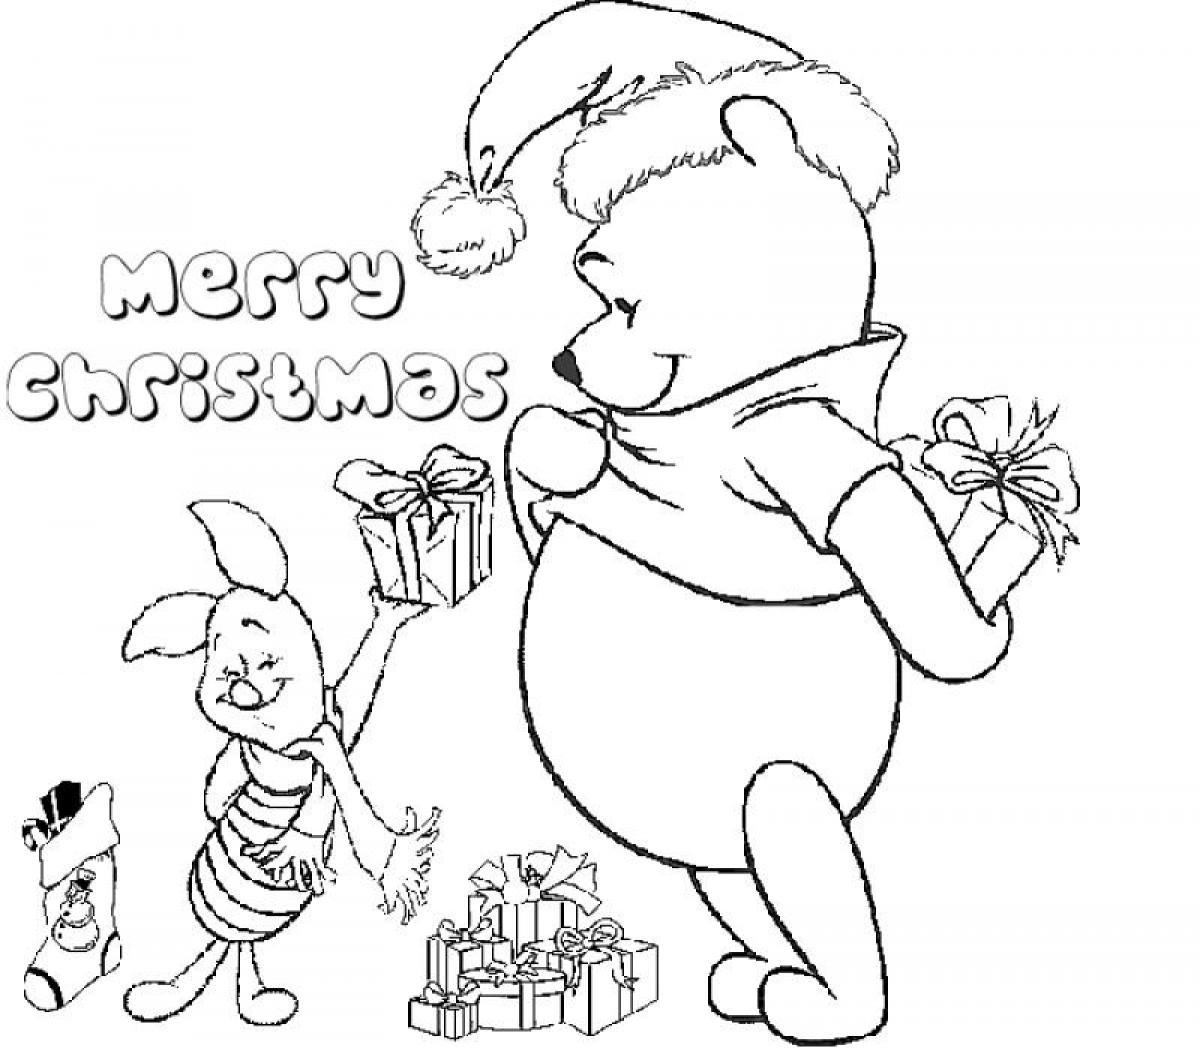 merry-christmas-coloring-pages-for-adults-at-getcolorings-free